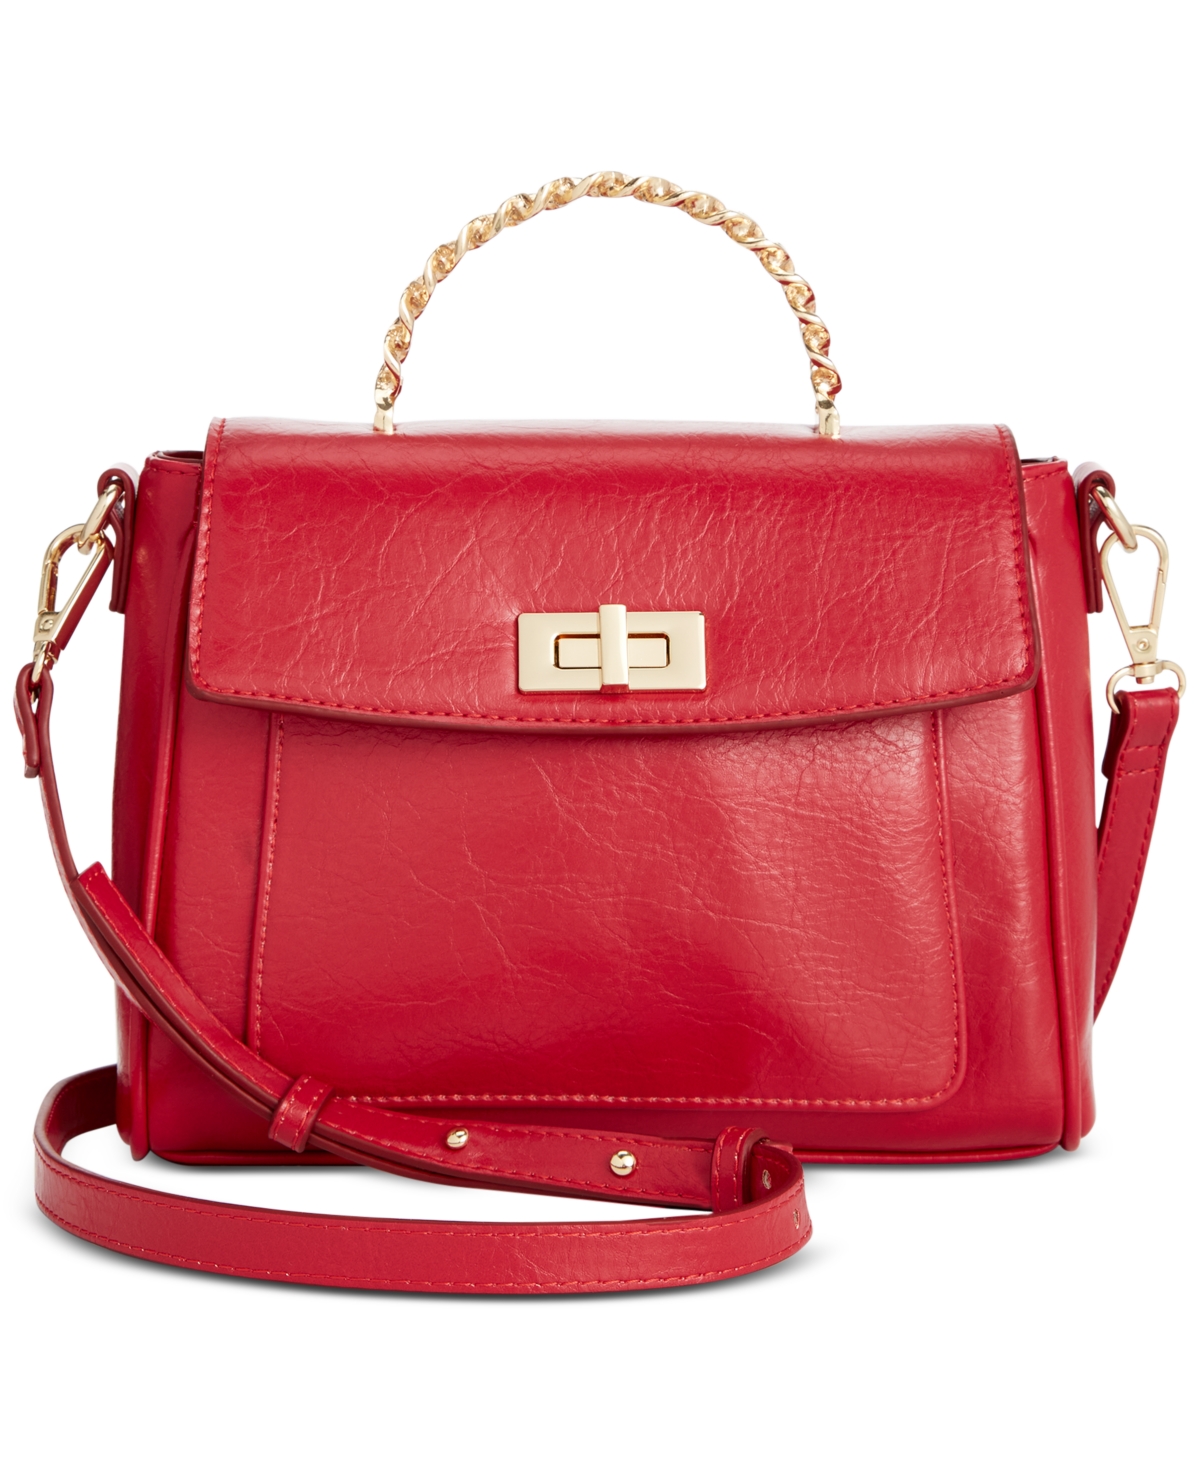 Inc International Concepts Emiliee Mini Top Handle Handbag, Created For Macy's In Red Pepper Glz